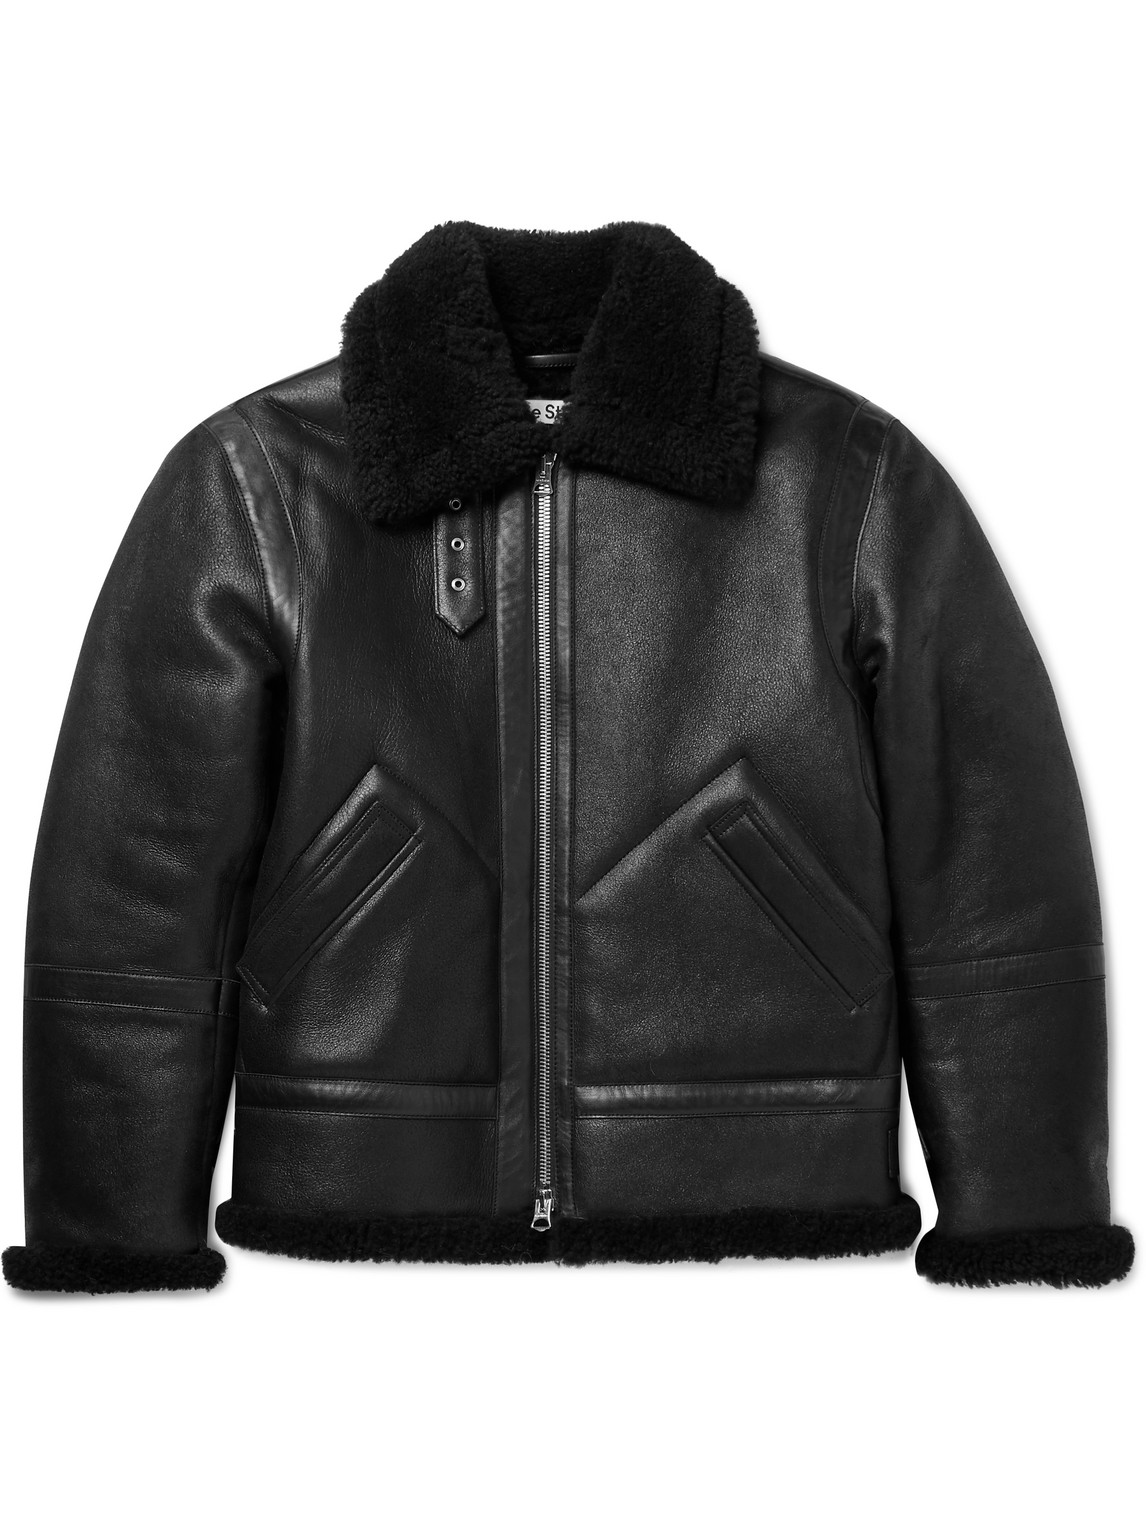 Acne Studios Shearling-Lined Full-Grain Leather Jacket